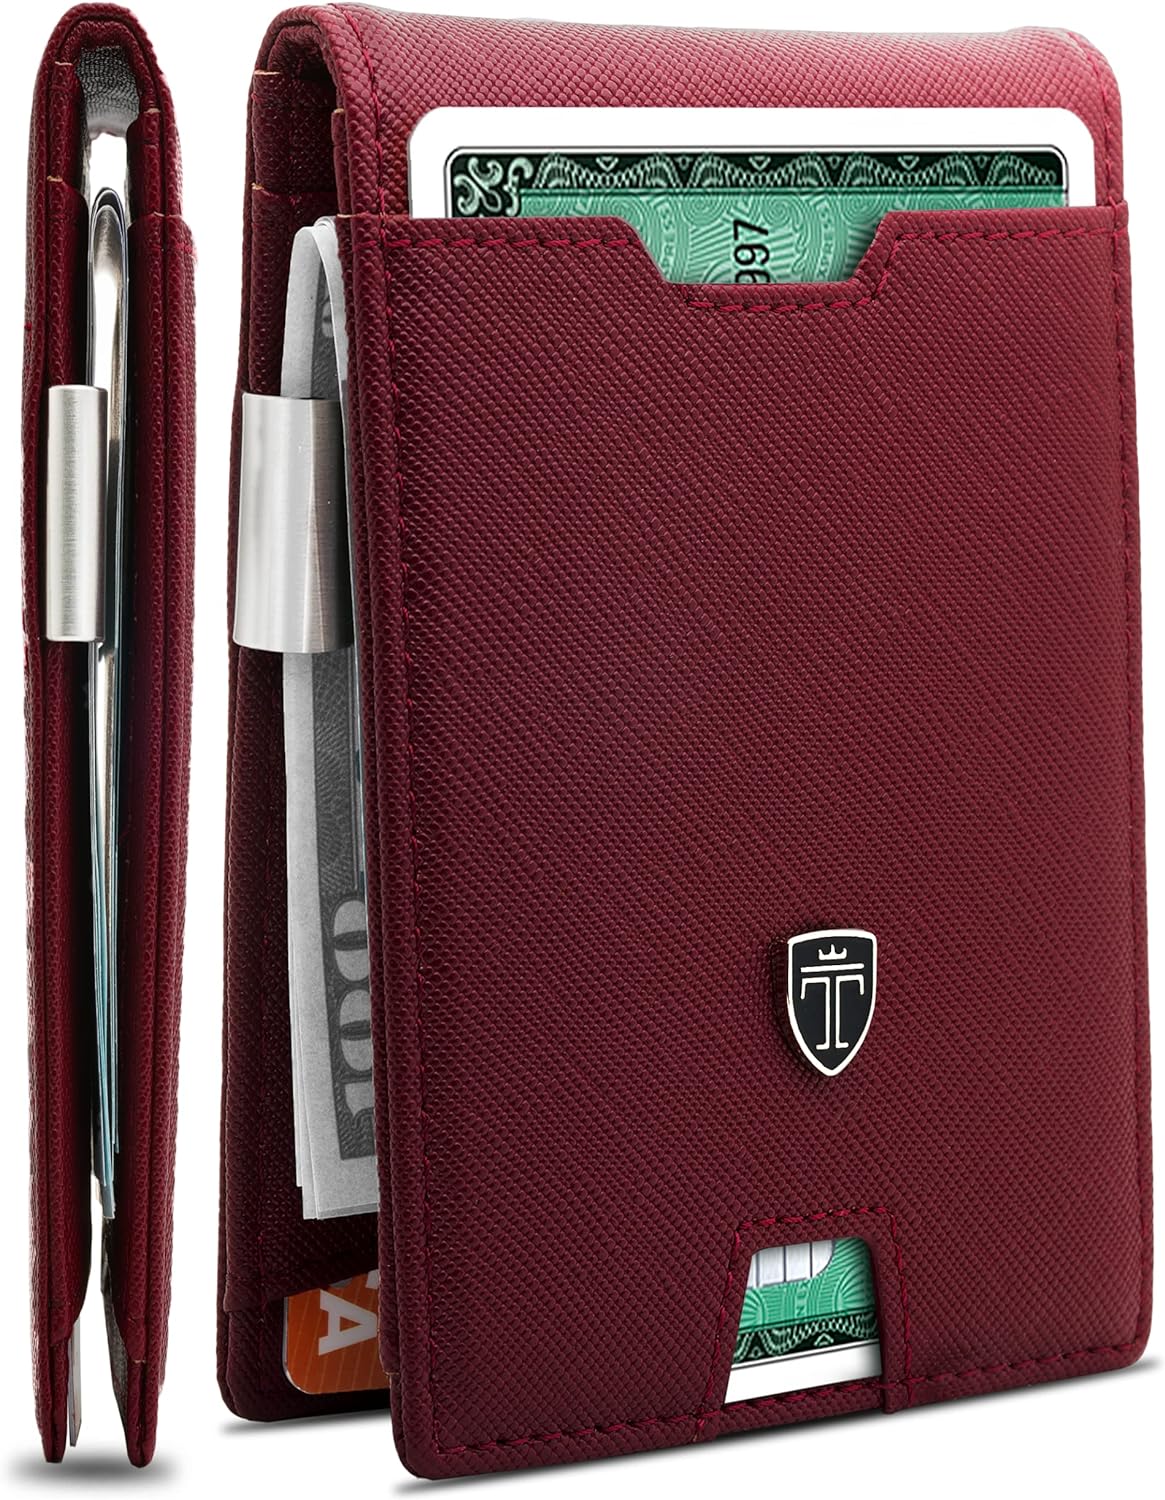 SleekGuard AUSTIN: Elevate Your Everyday with RFID-Blocking Slim Wallet & Money Clip – Stylish Security in a Gift-Ready Box